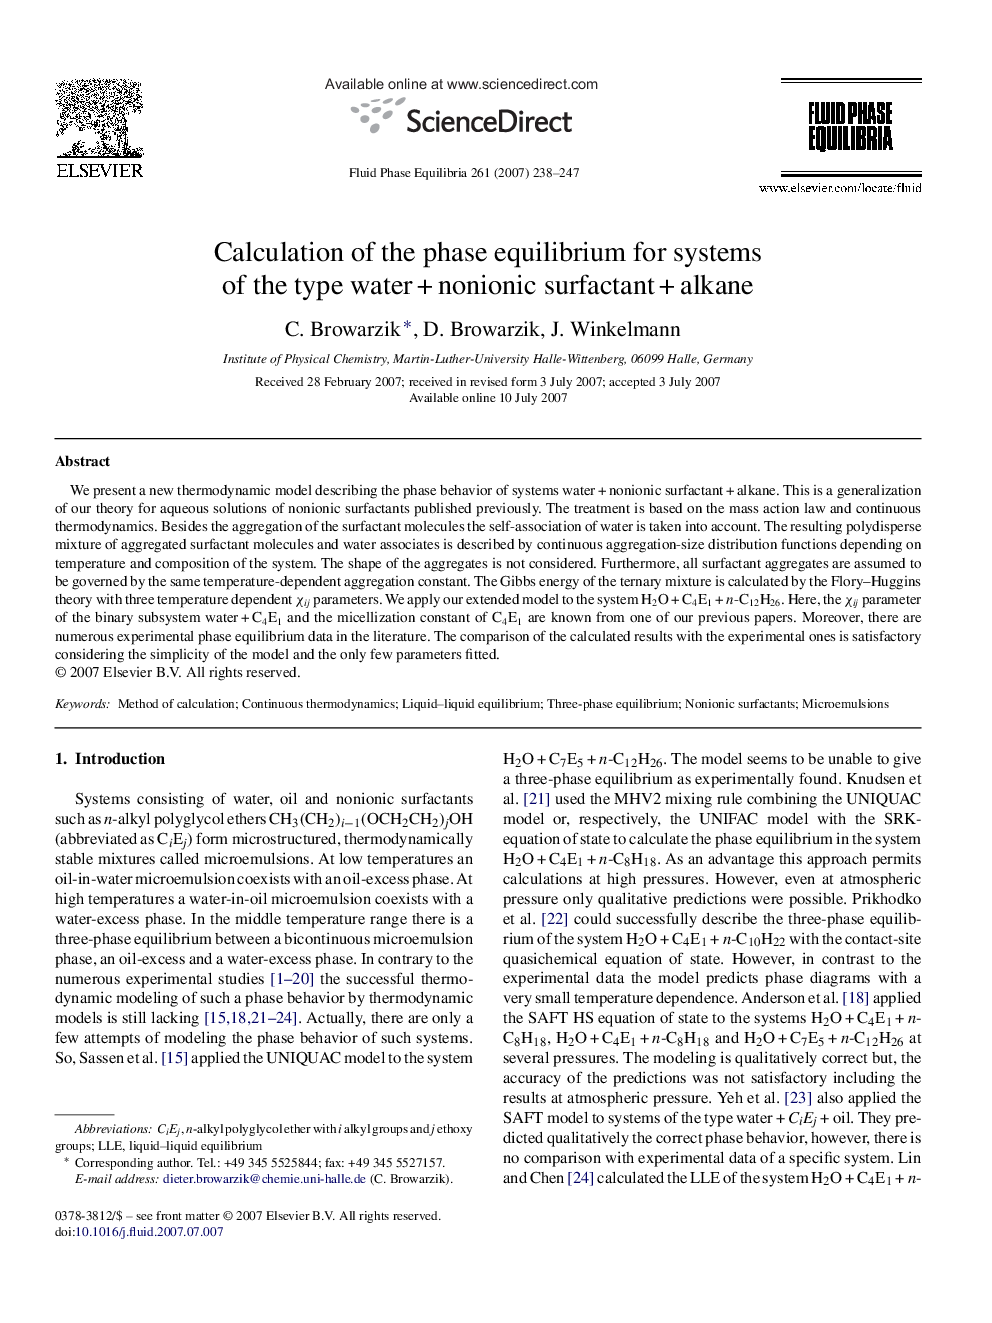 Calculation of the phase equilibrium for systems of the type water + nonionic surfactant + alkane